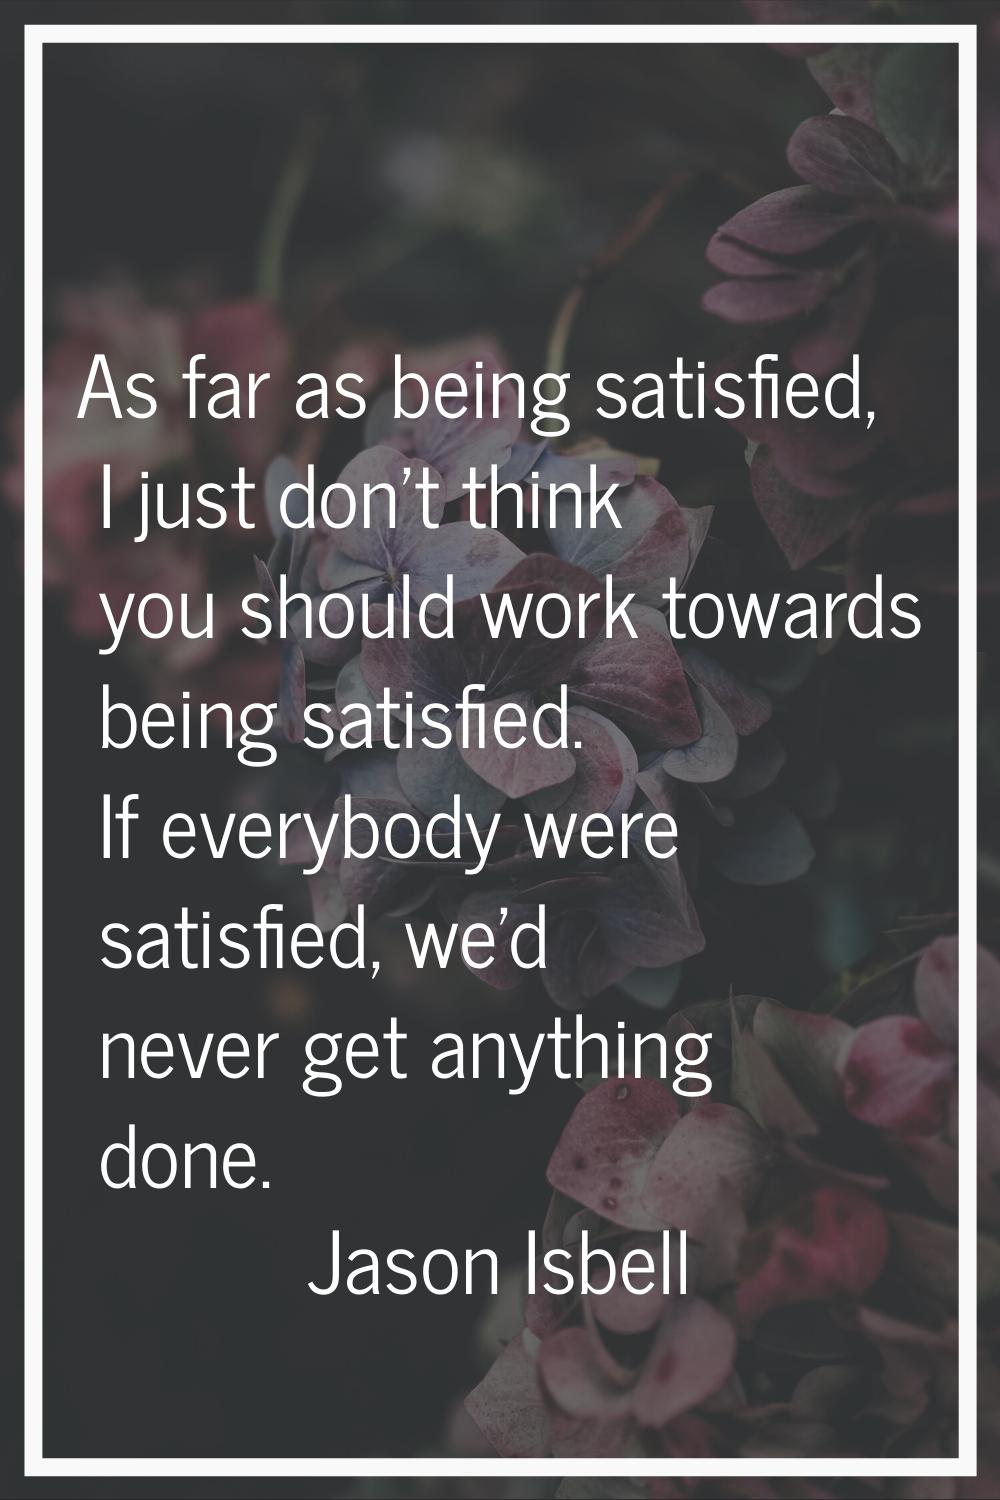 As far as being satisfied, I just don't think you should work towards being satisfied. If everybody